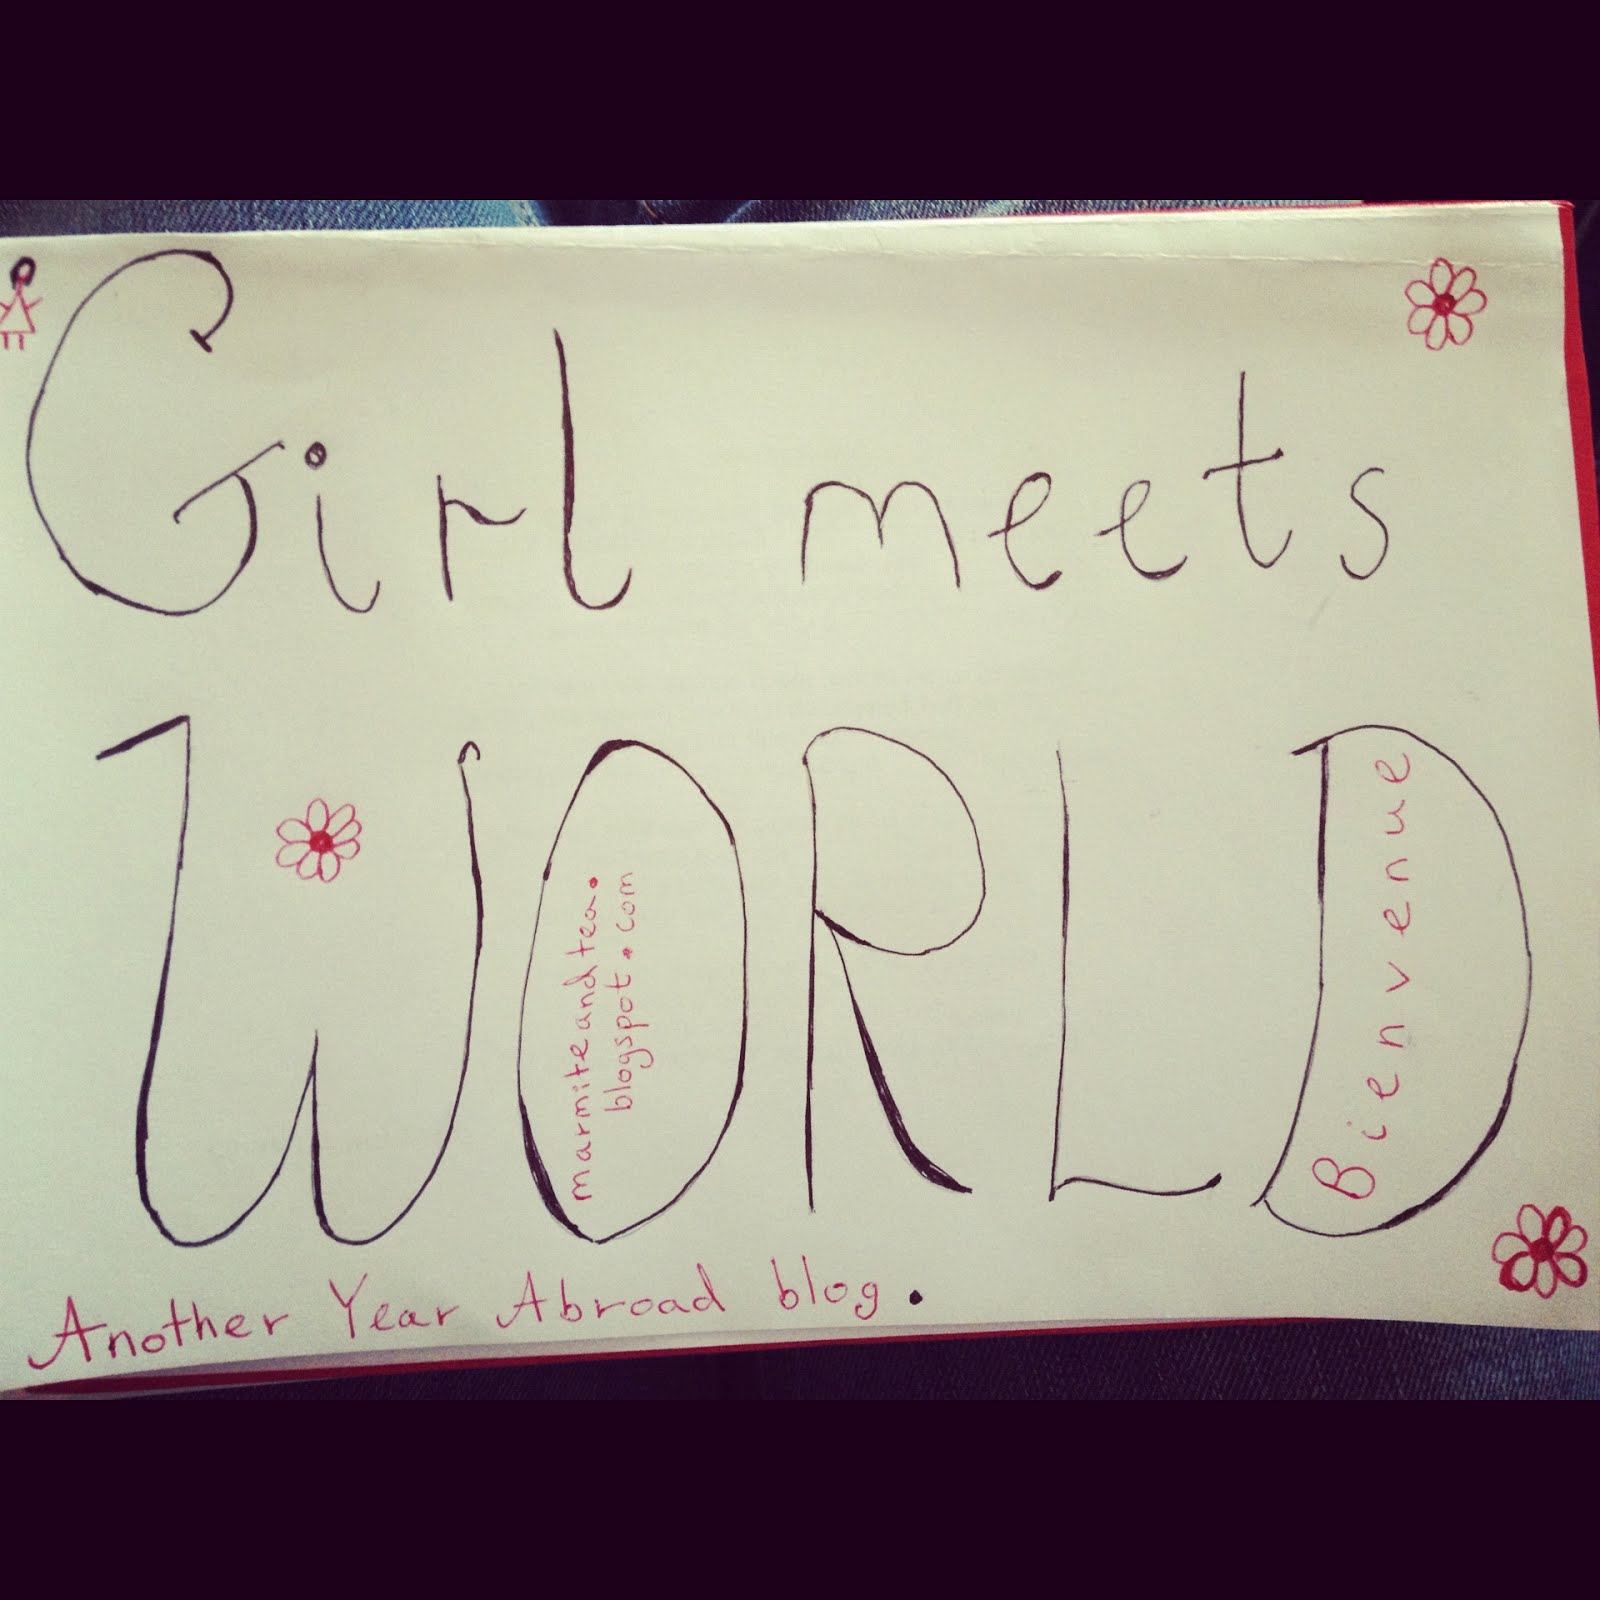 Girl meets world- another Year Abroad blog